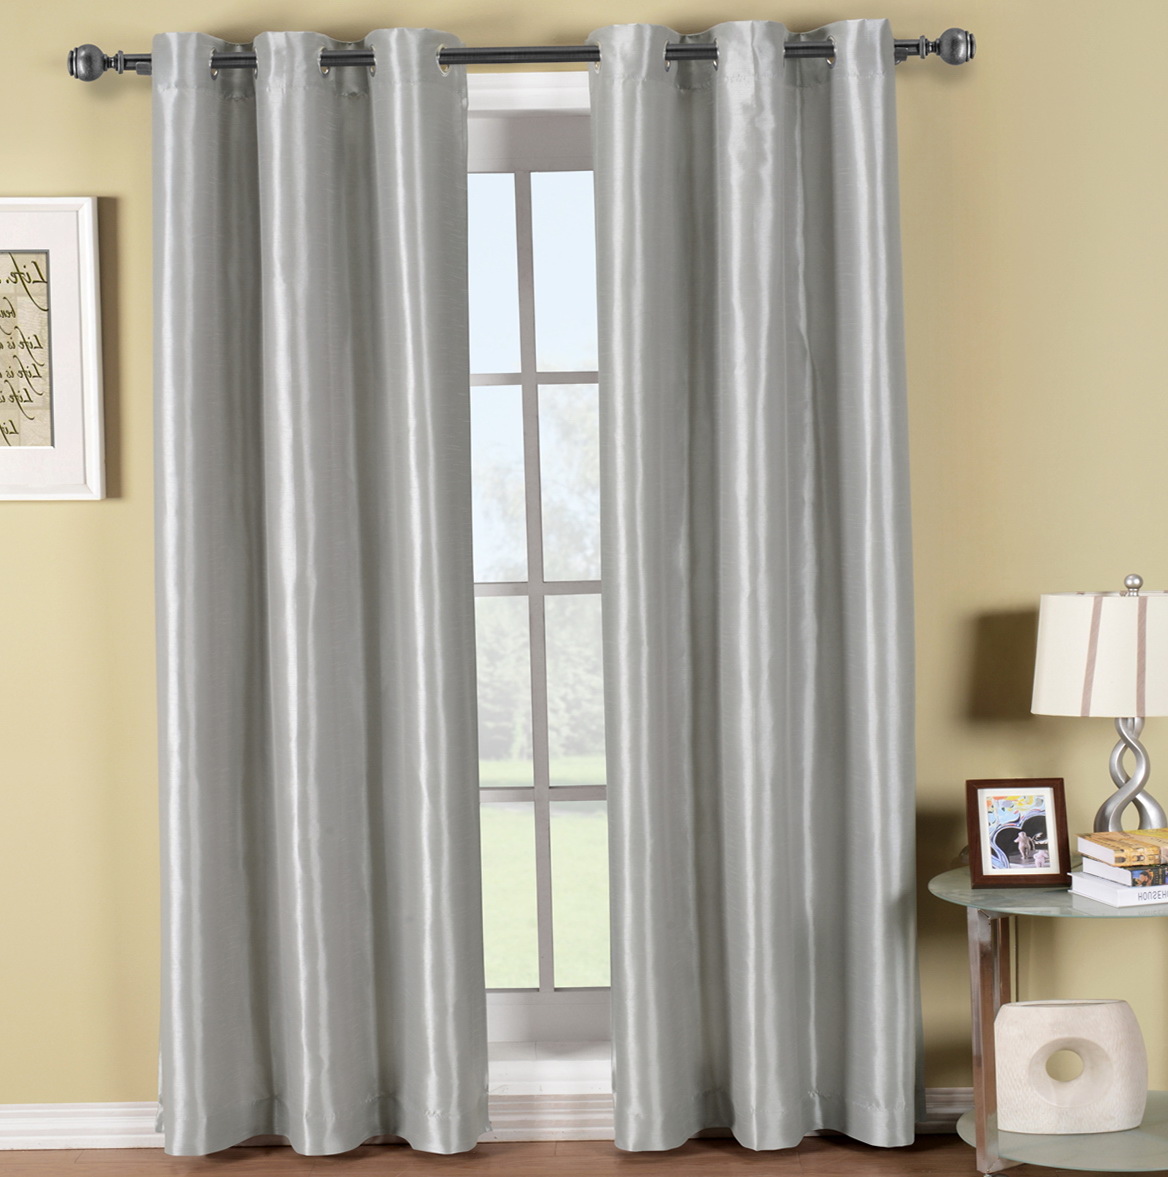 Bamboo Window Treatments For Your Home, Extra Long Curtain Rods 200 Inches